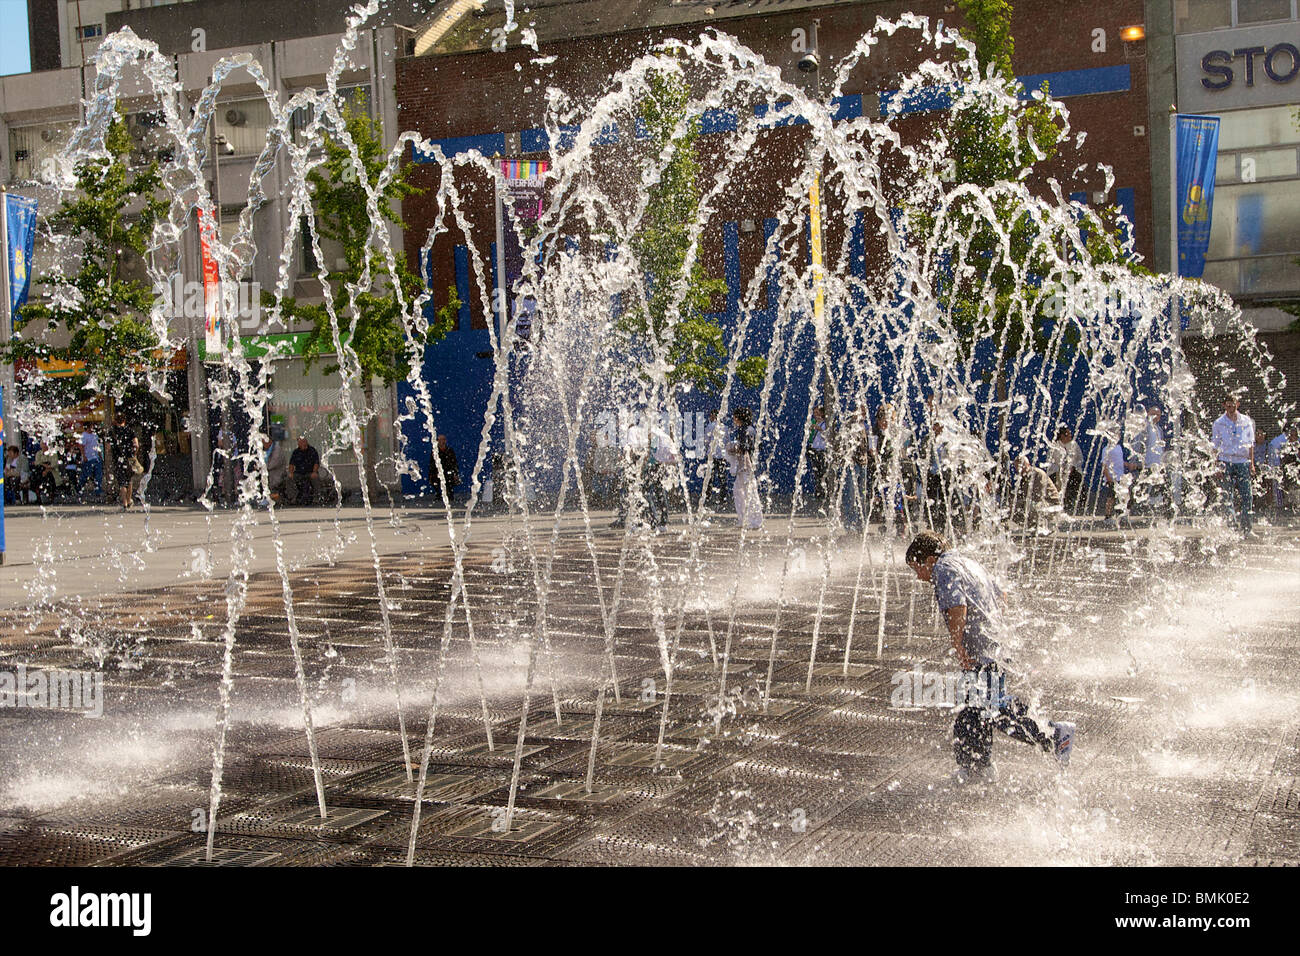 The fountain in Williamson Square in Liverpool with boy running through it. Stock Photo